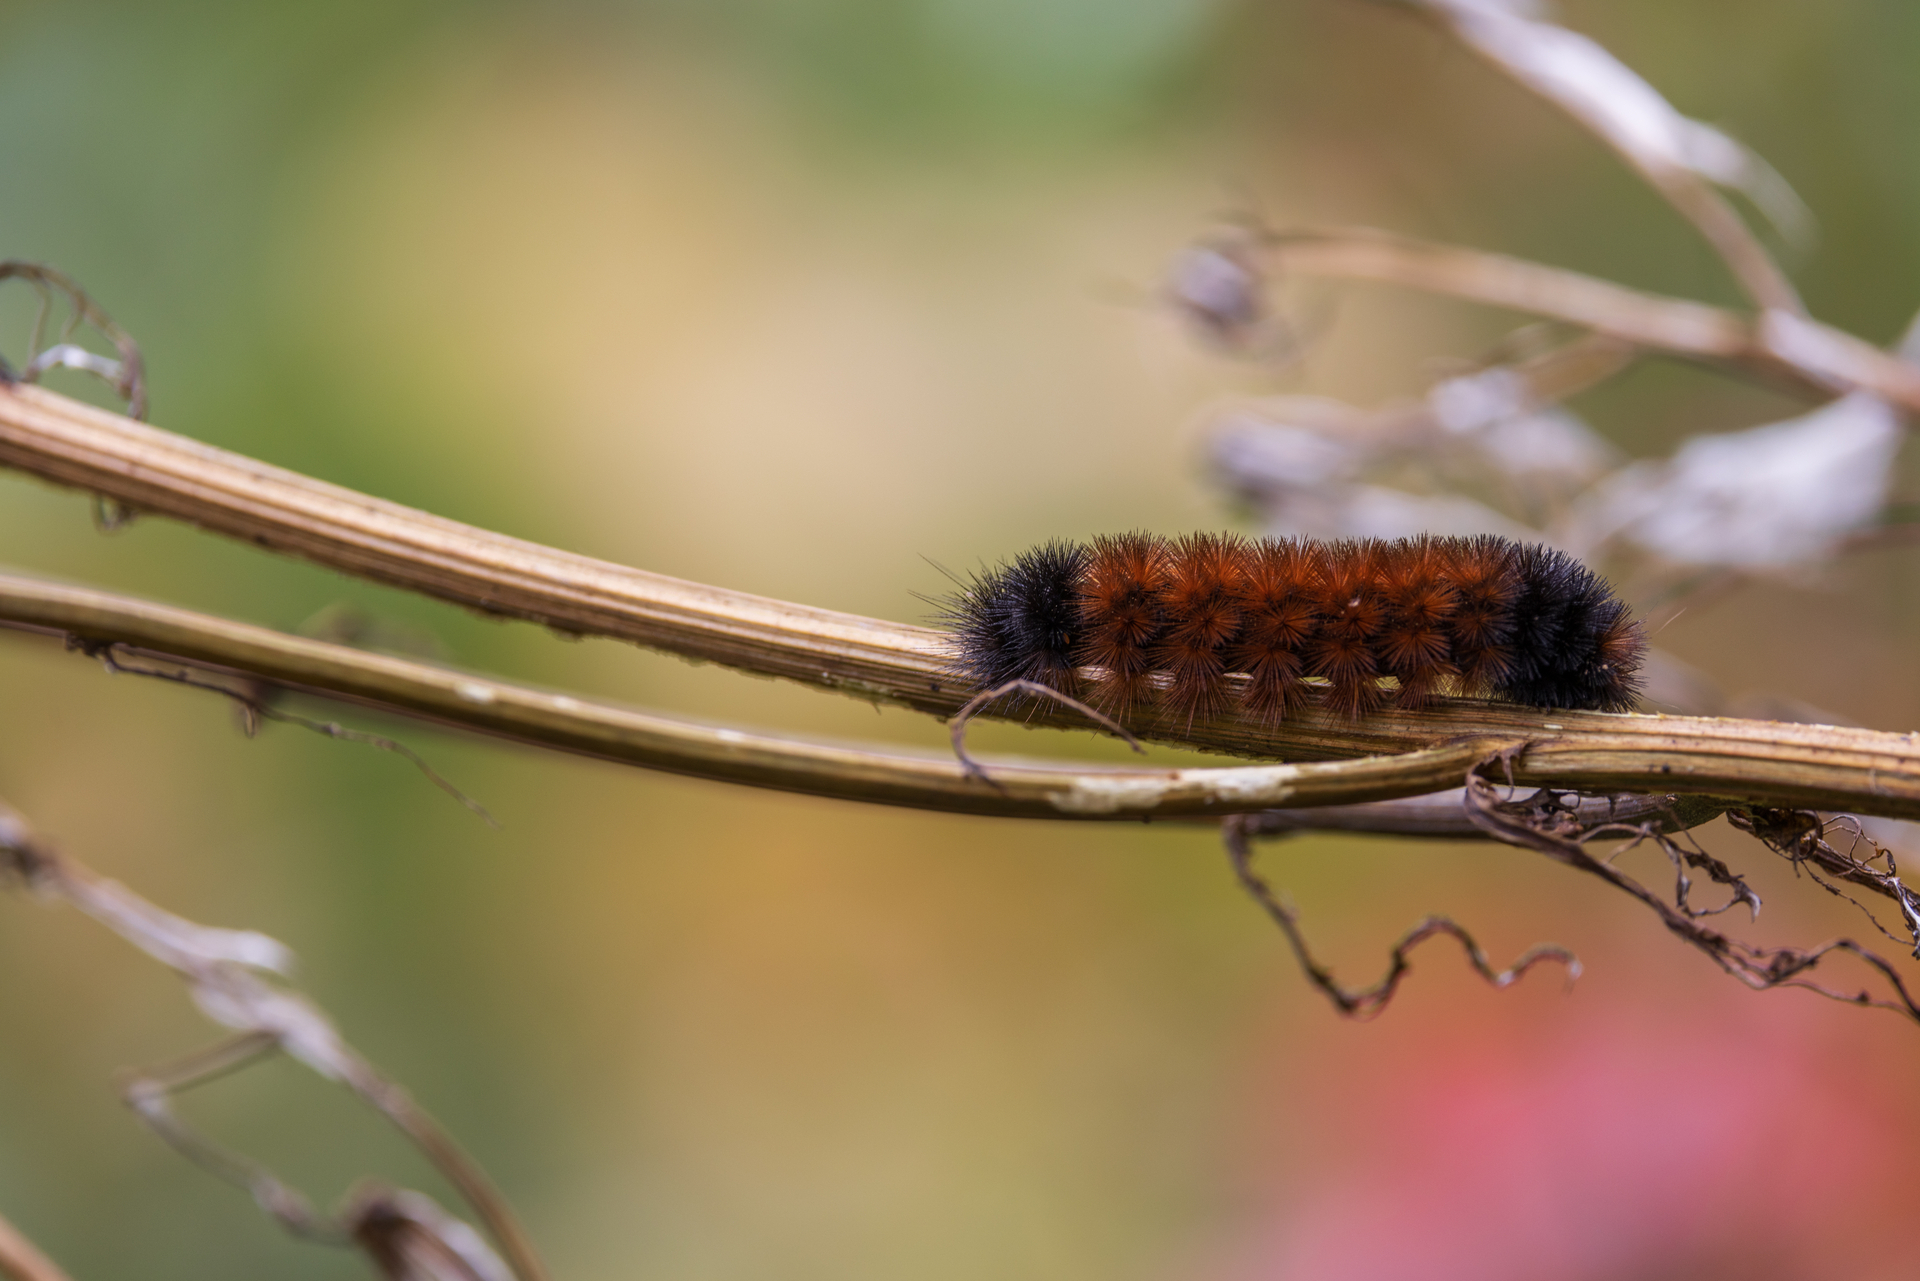 Furry brown and black caterpillar on a branch